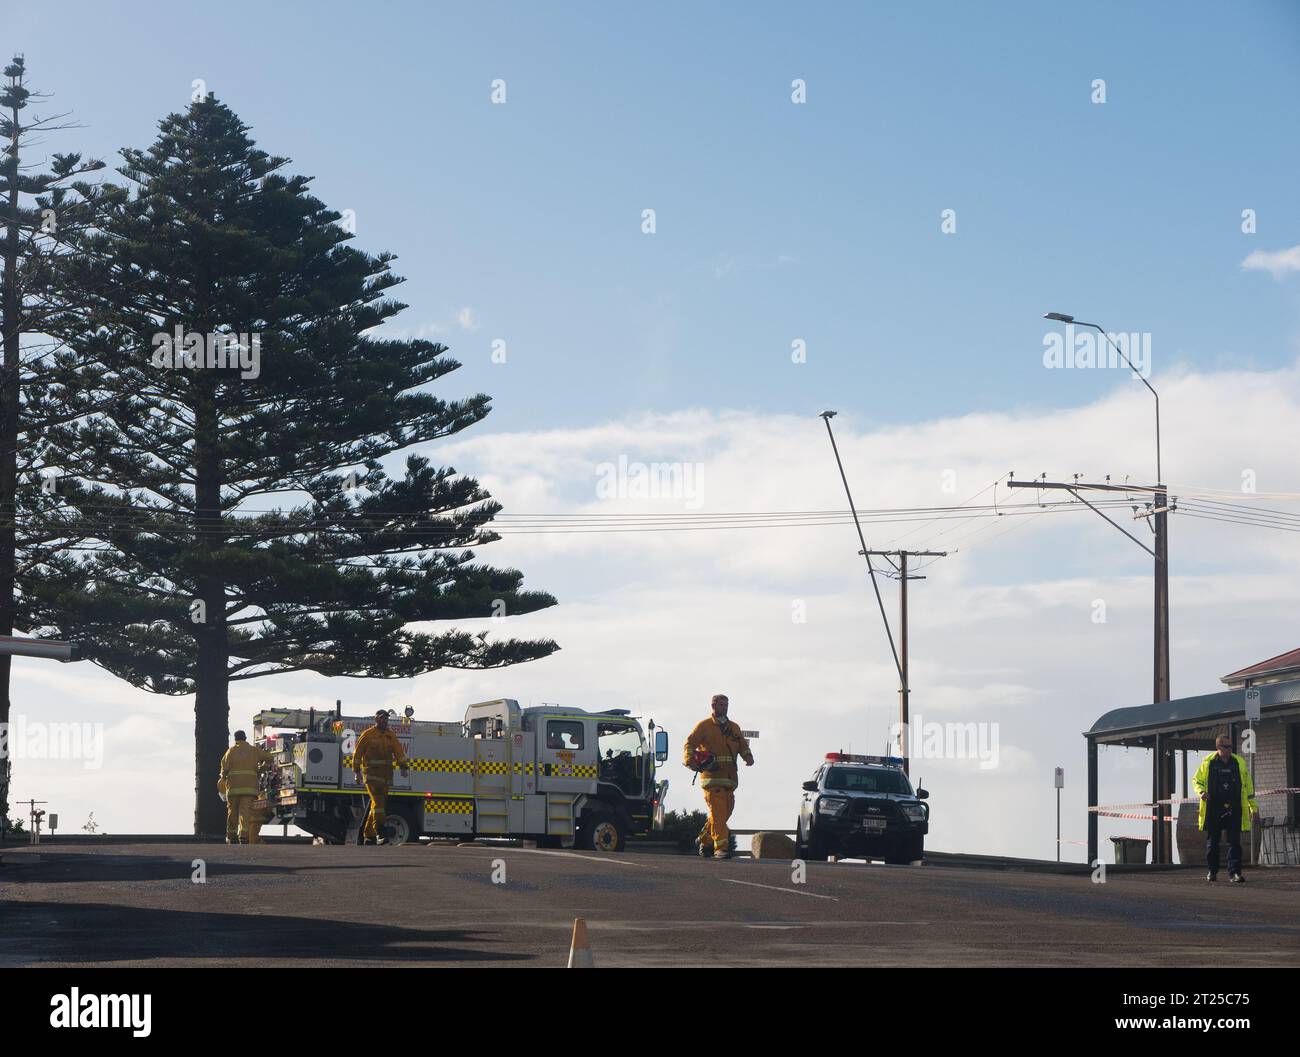 Volunteer firefighters and police on street with fire truck and police vehicle in Penneshaw, Kangaroo Island, Australia. Stock Photo